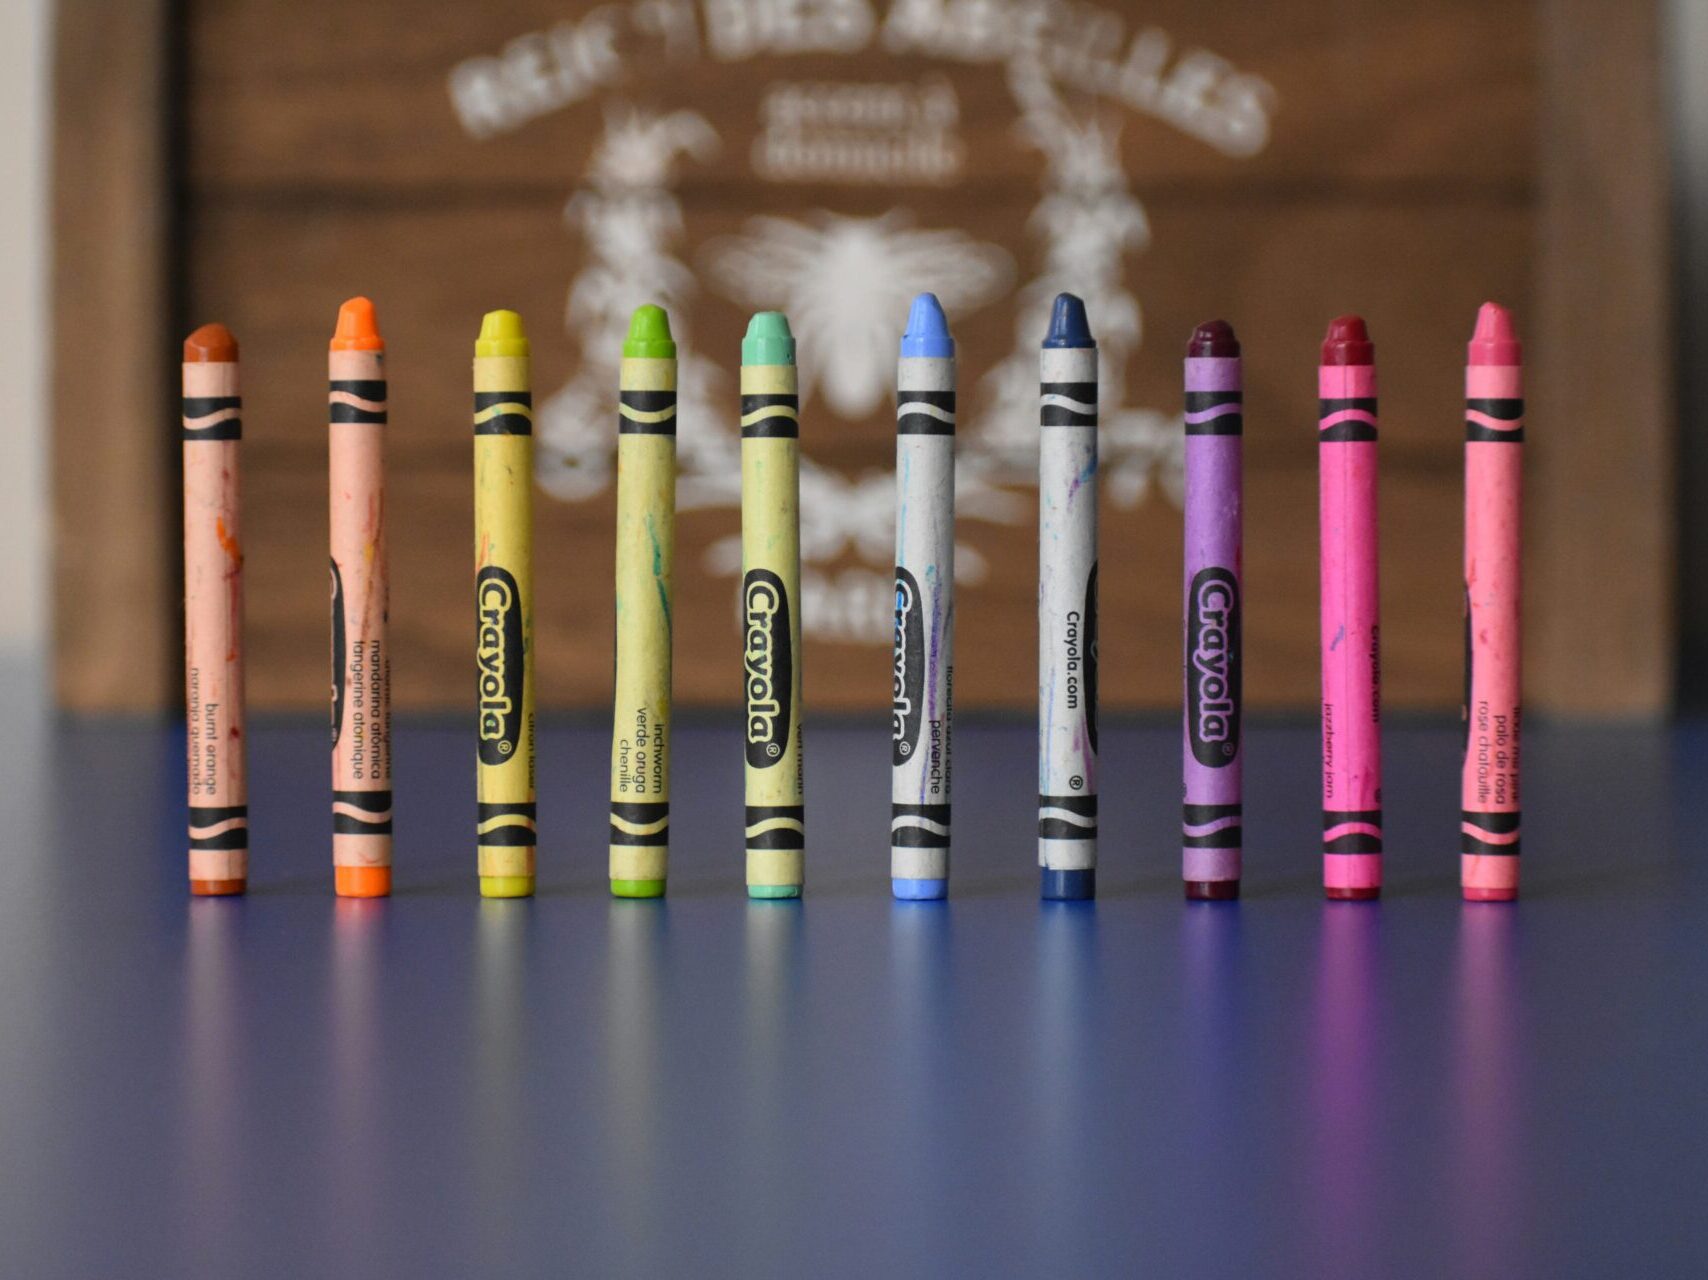 different colors of crayons standing upright on a table with blurred background